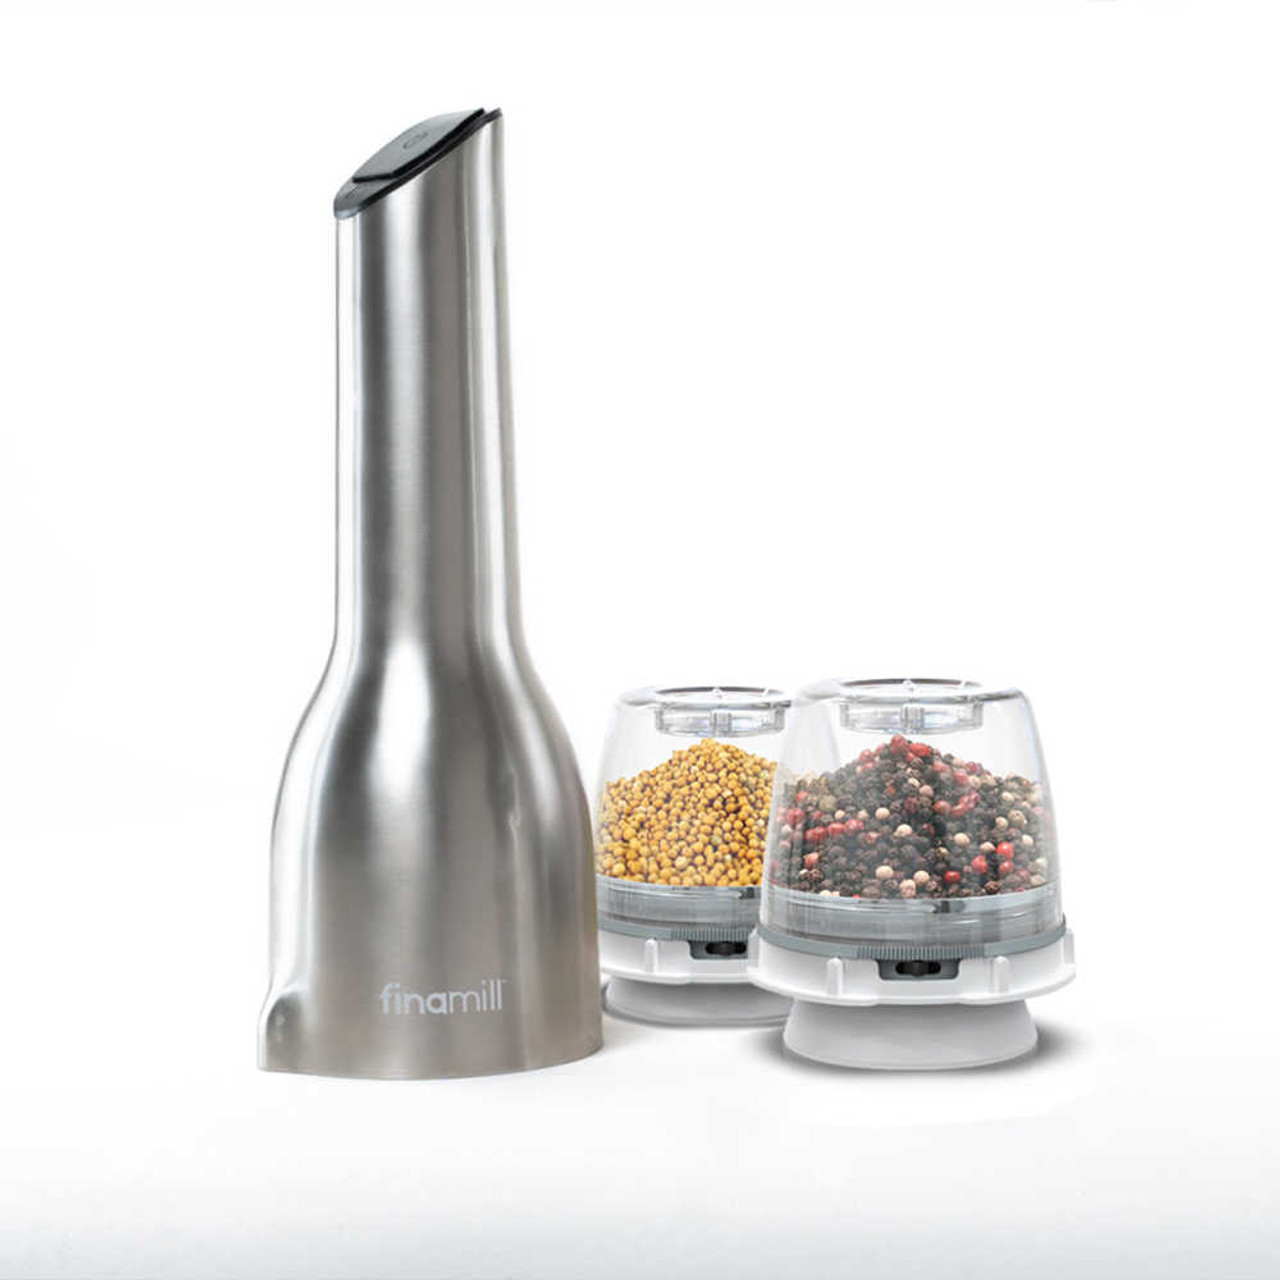 https://cdn11.bigcommerce.com/s-hccytny0od/images/stencil/1280x1280/products/5397/23560/FinaMill_Stainless_Steel_Rechargeable_Spice_Grinder_5__35330.1682541574.jpg?c=2?imbypass=on